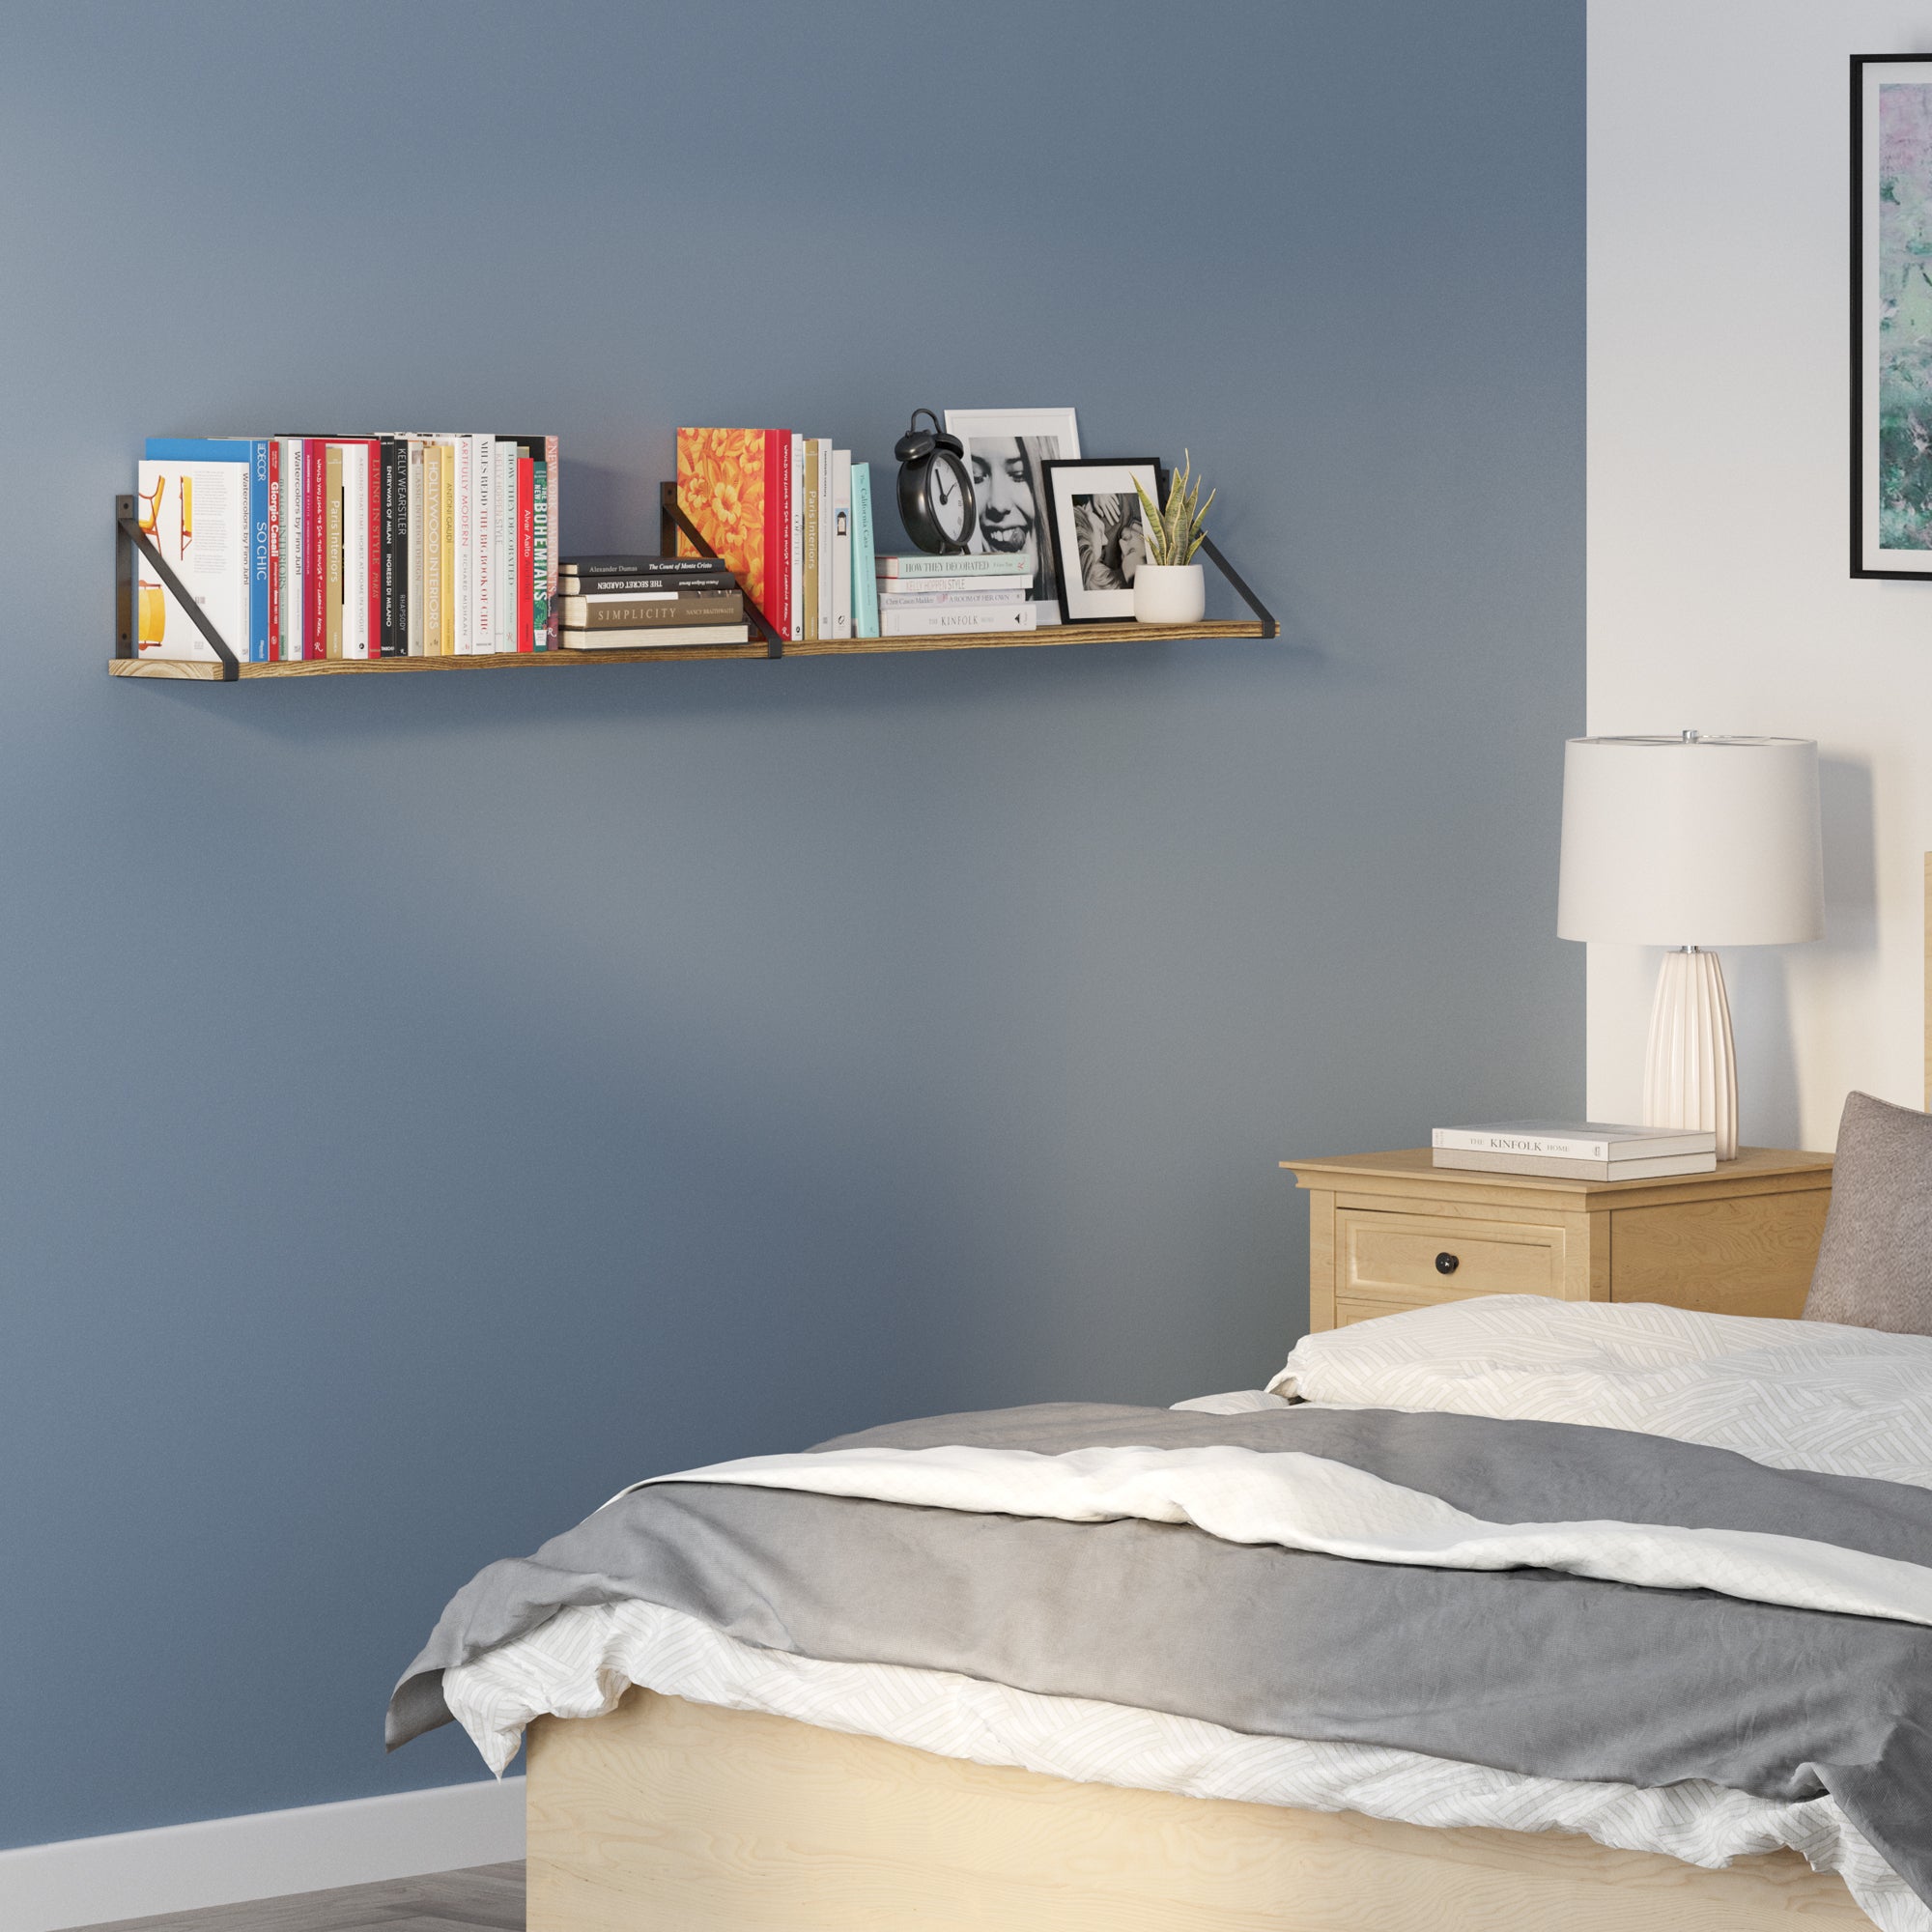 A part of a bedroom with a blue wall. There's a book shelf for bedroom above the bed filled with books and some framed pictures. Beside the bed is a wooden nightstand with a lamp on it, and the bed itself is partially visible with a grey and white bedding.